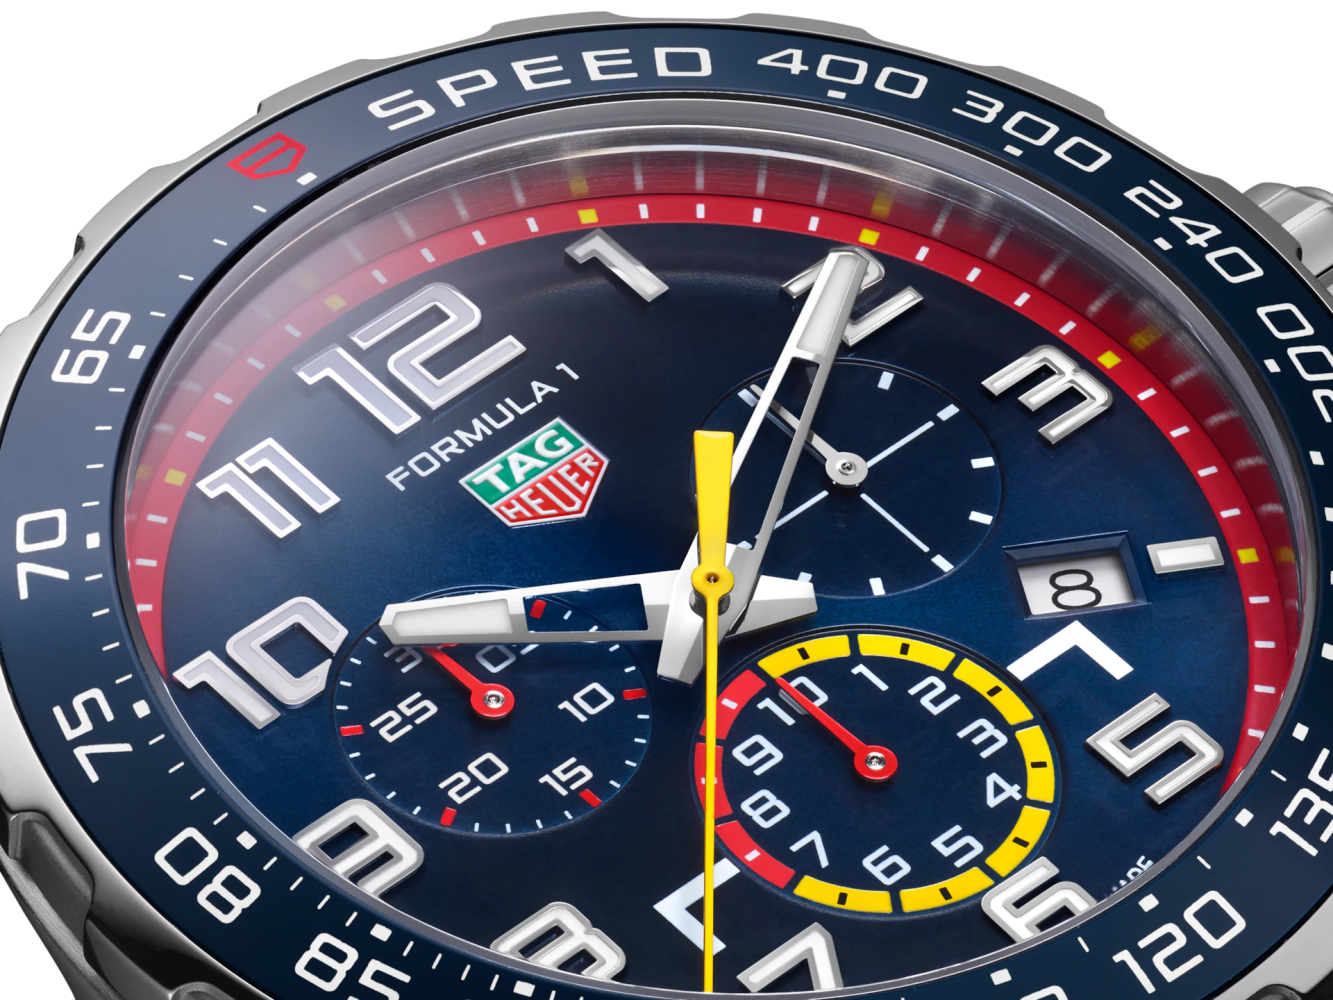 TAG Heuer Formula 1 Chronograph RED BULL RACING SPECIAL EDITION CAZ101AL.FT8052